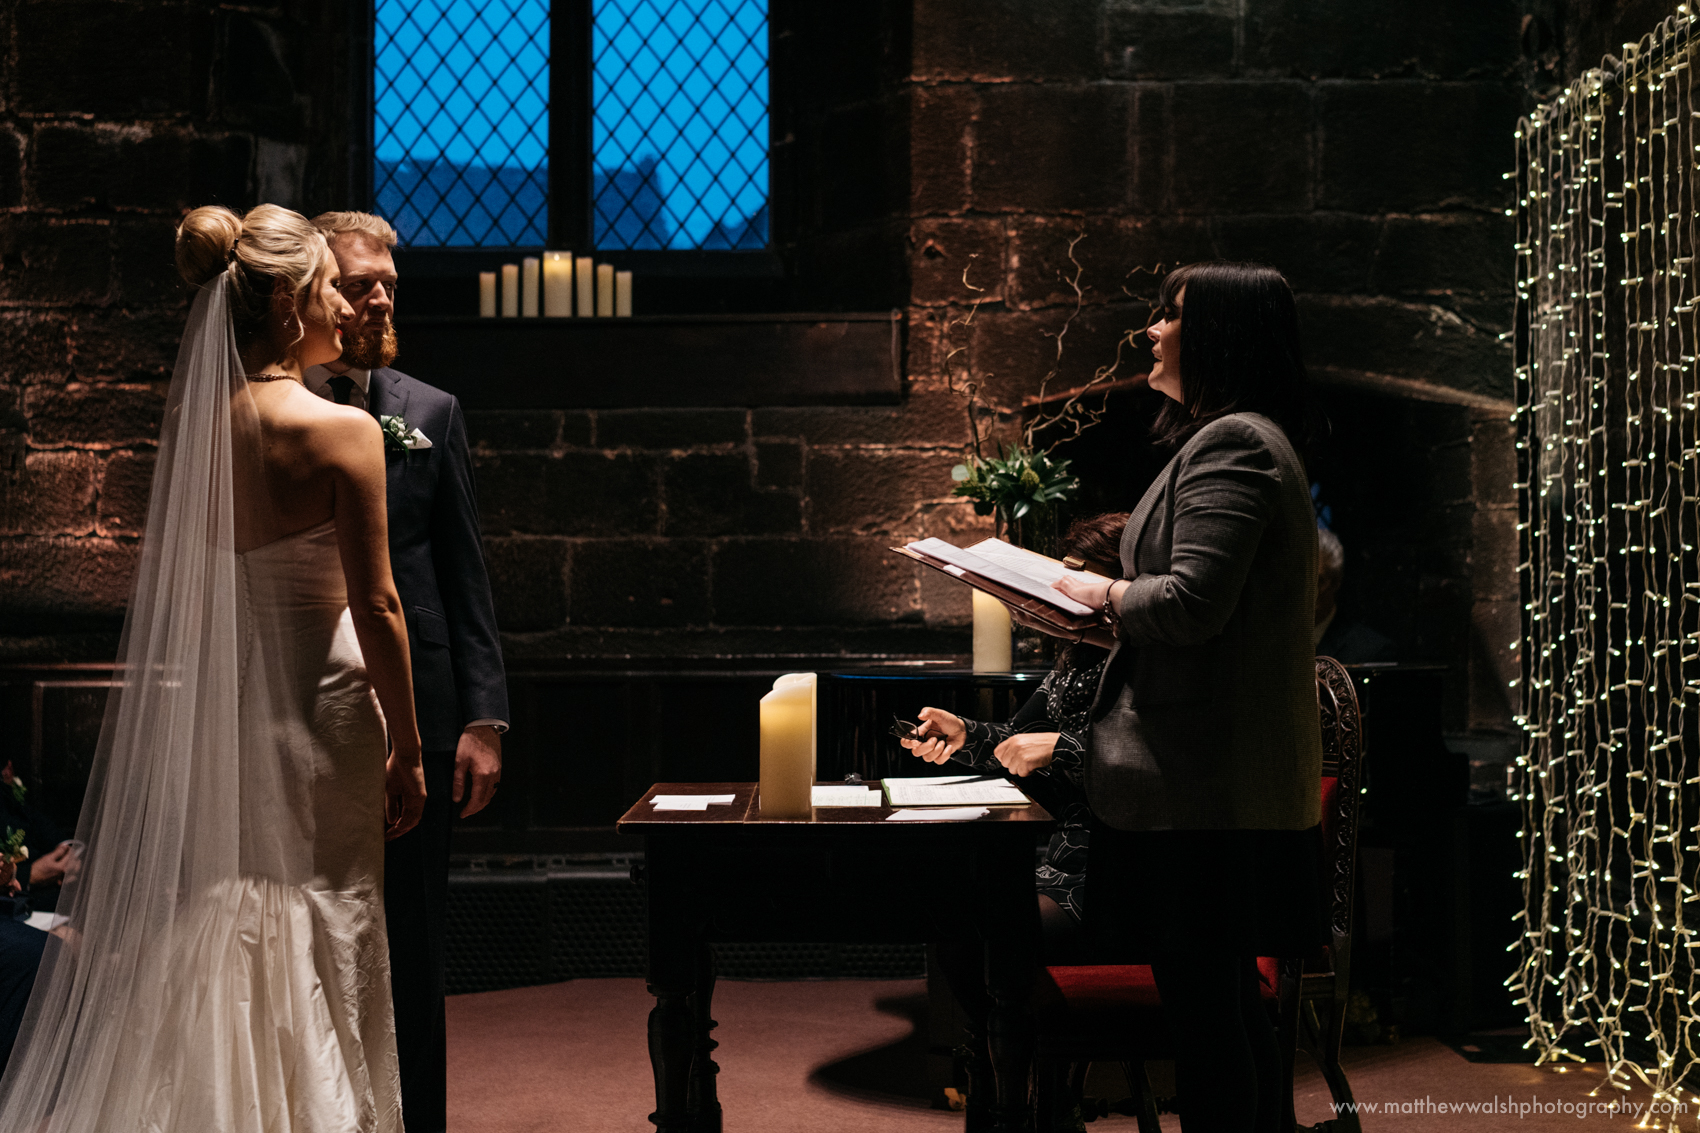 The final part of the the ceremony in the Baronial hall at Chetham's